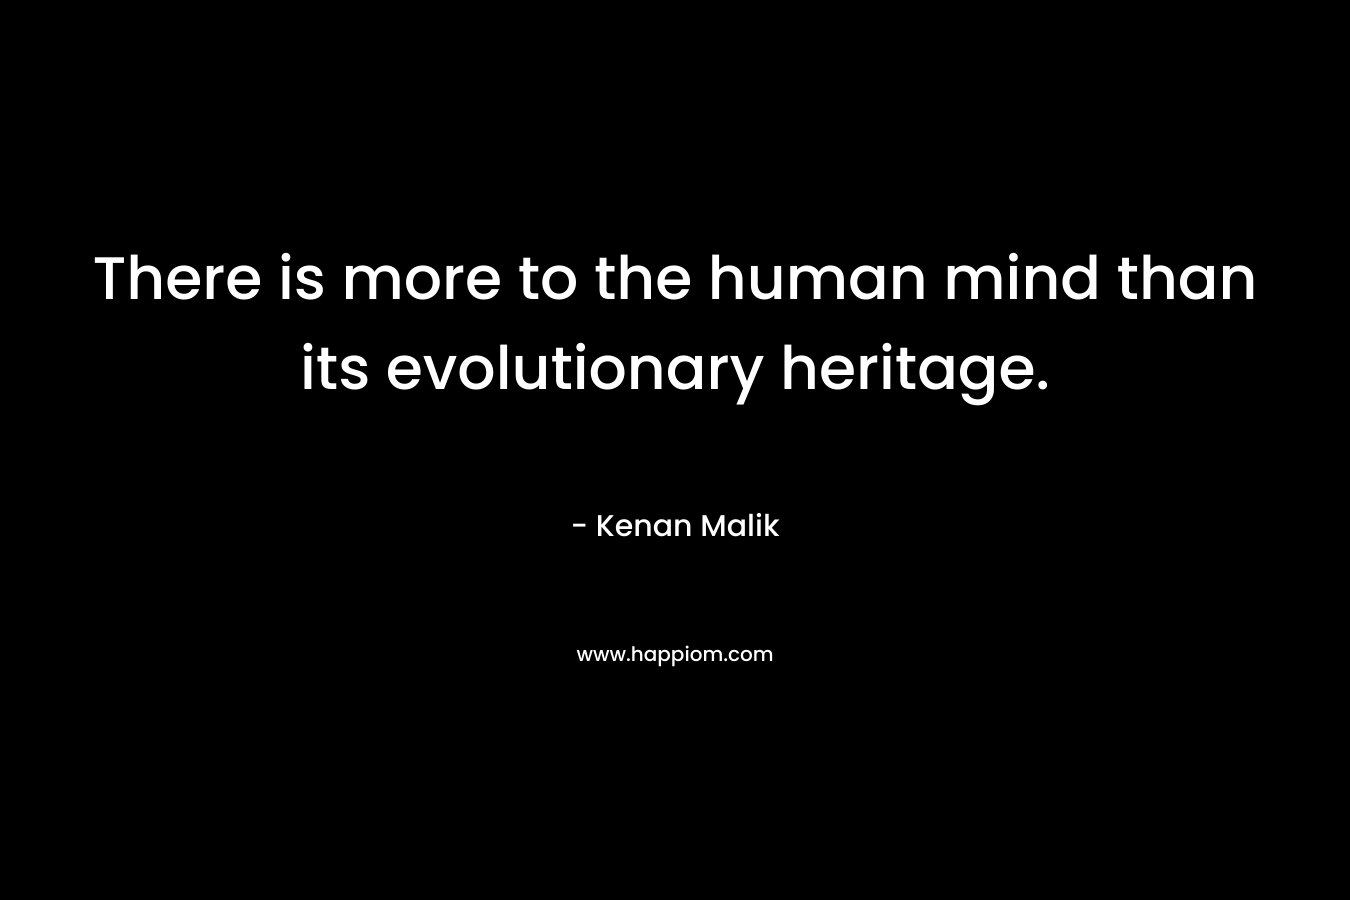 There is more to the human mind than its evolutionary heritage.